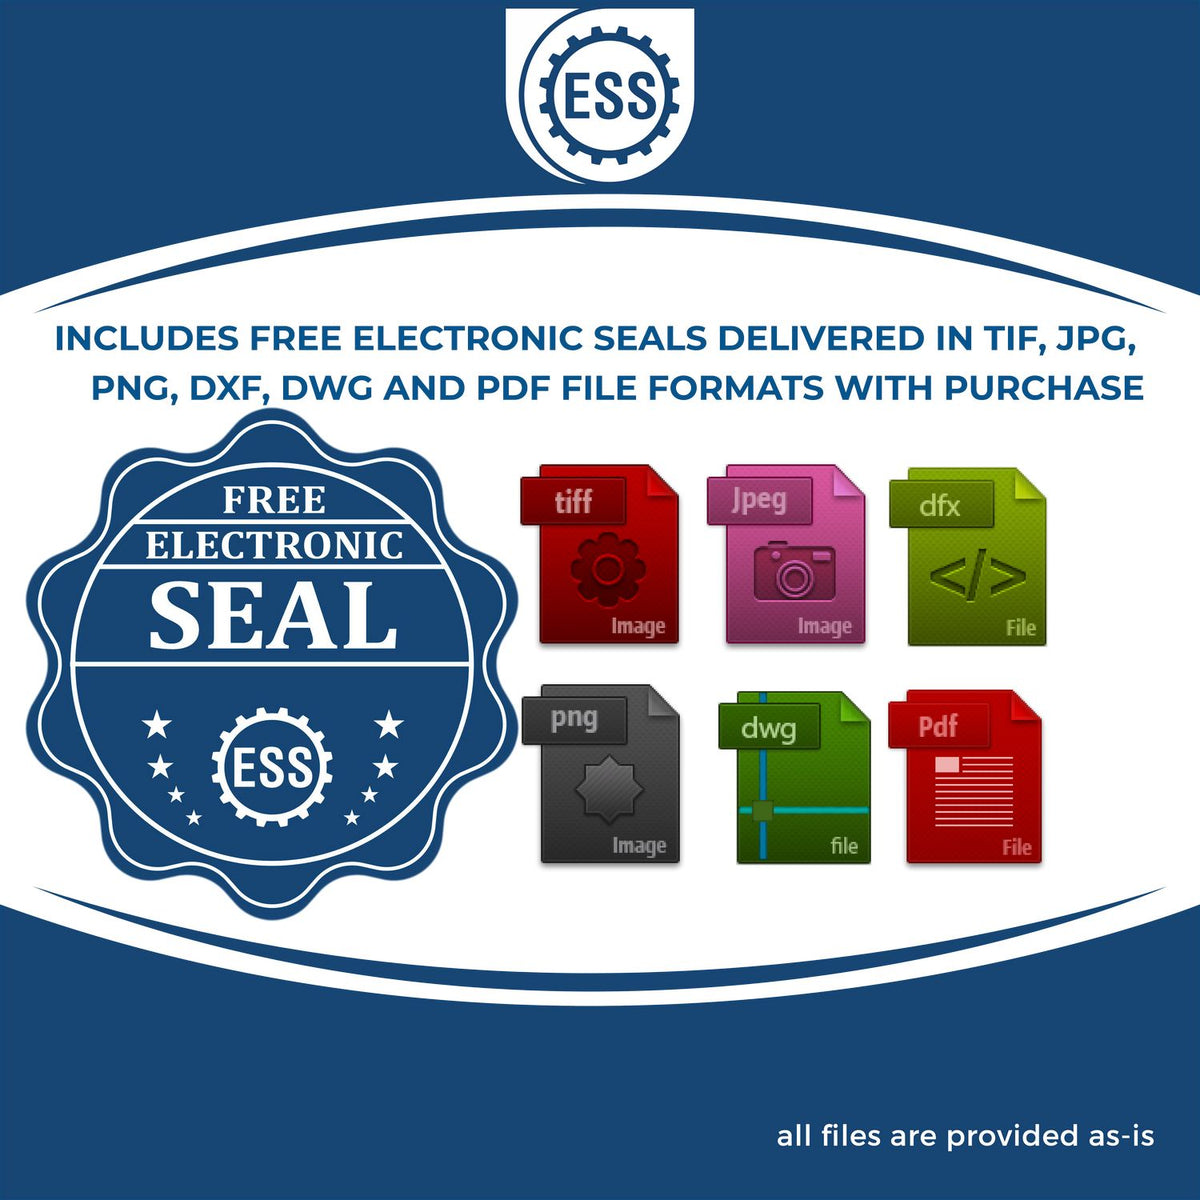 An infographic for the free electronic seal for the State of Pennsylvania Long Reach Architectural Embossing Seal illustrating the different file type icons such as DXF, DWG, TIF, JPG and PNG.